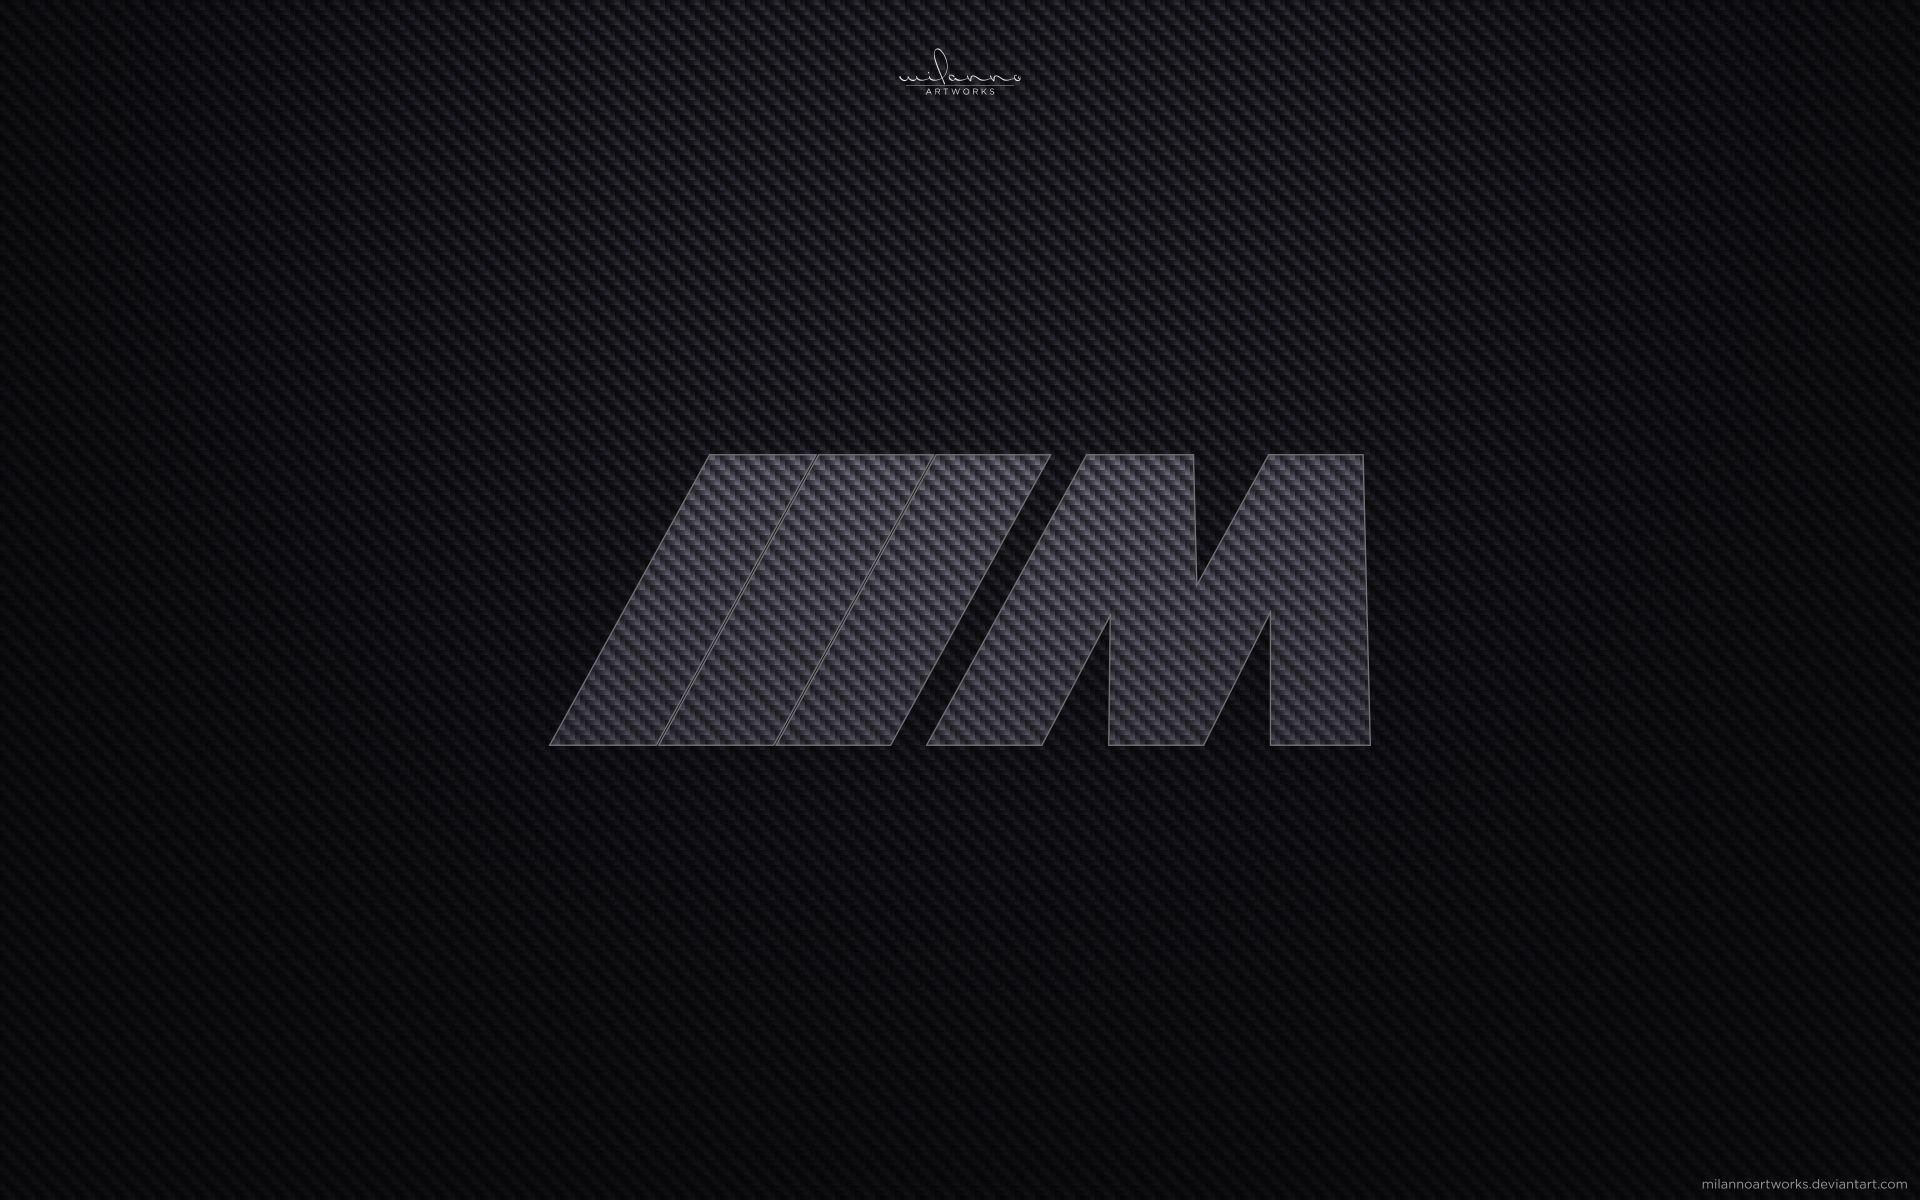 Quality Cool BMW Logo Wallpaper for mobile and desktop